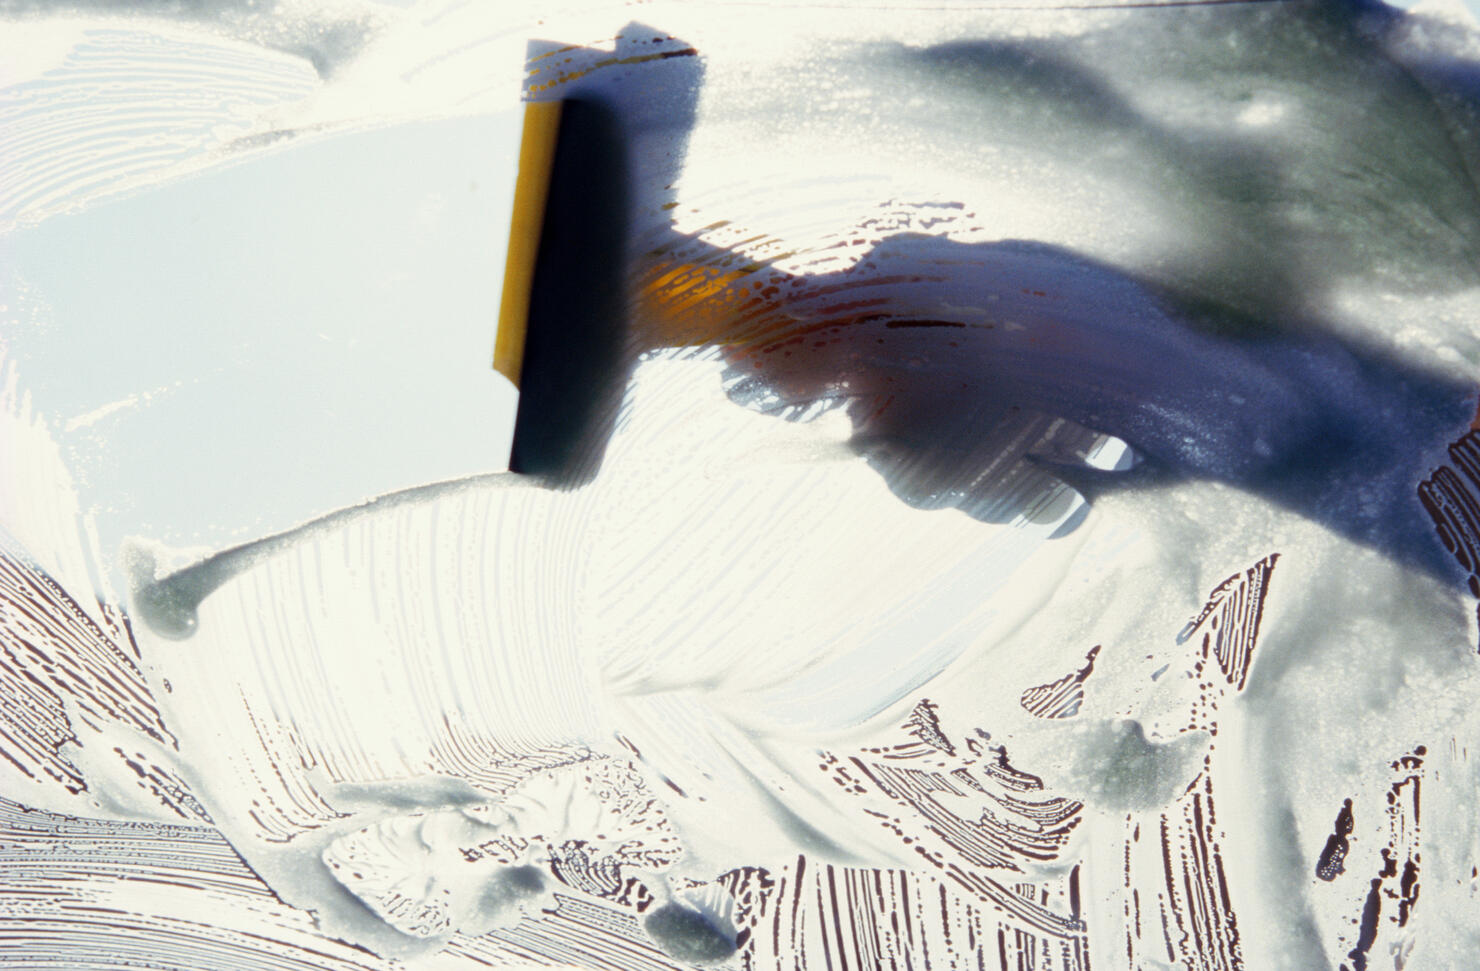 Person wiping soapy windscreen with squeegee, close-up